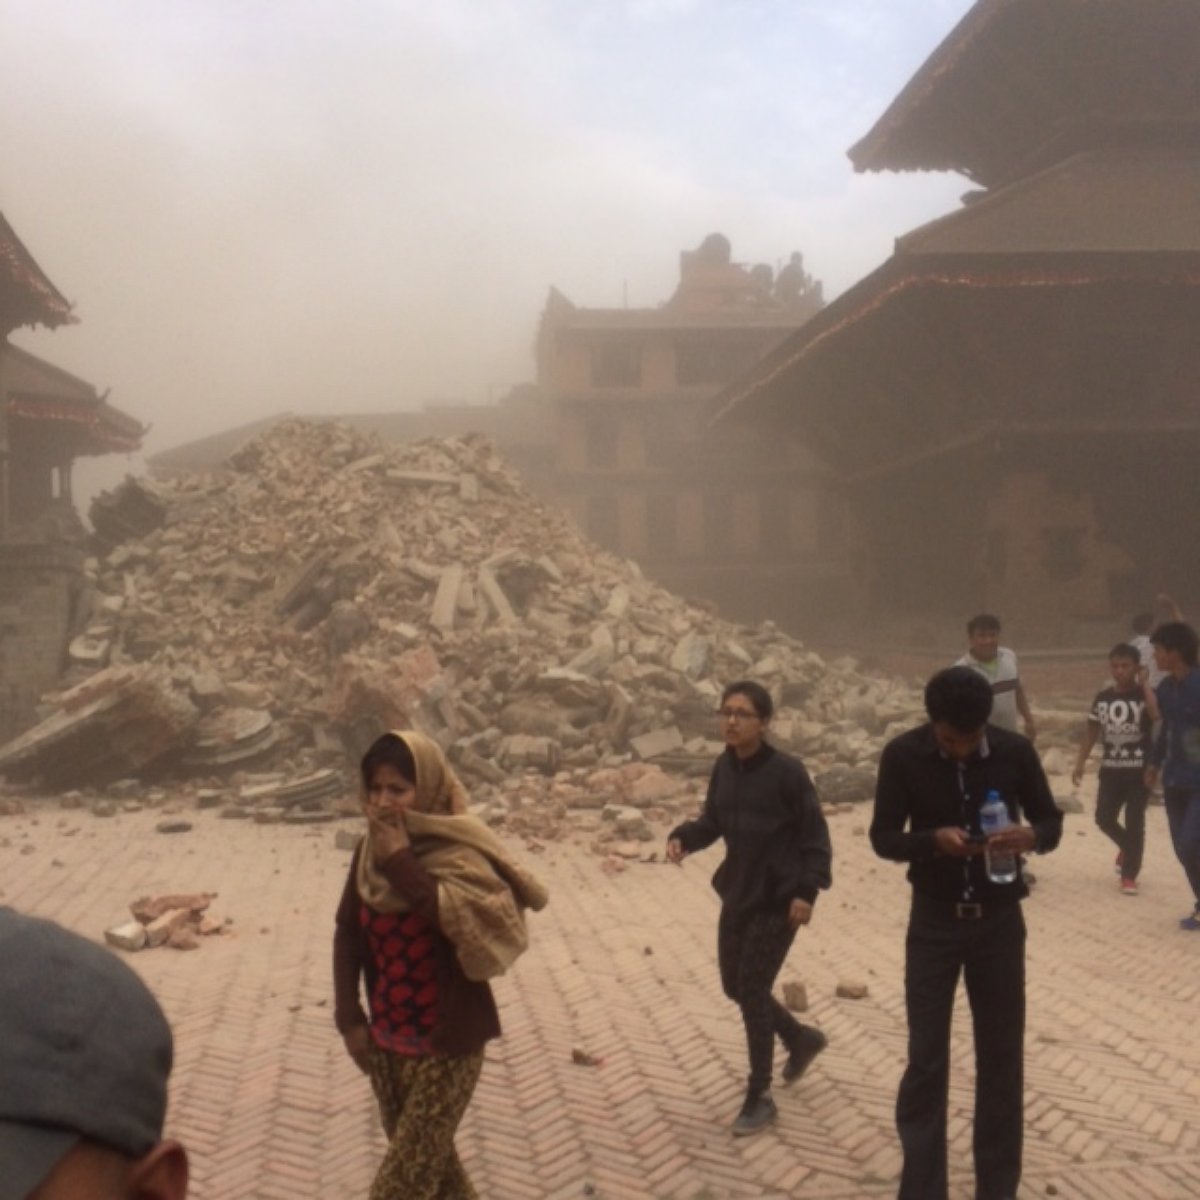 PHOTO: Damage in Bhaktapur, an old city just outside Kathmandu, after an earthquake strikes Nepal.